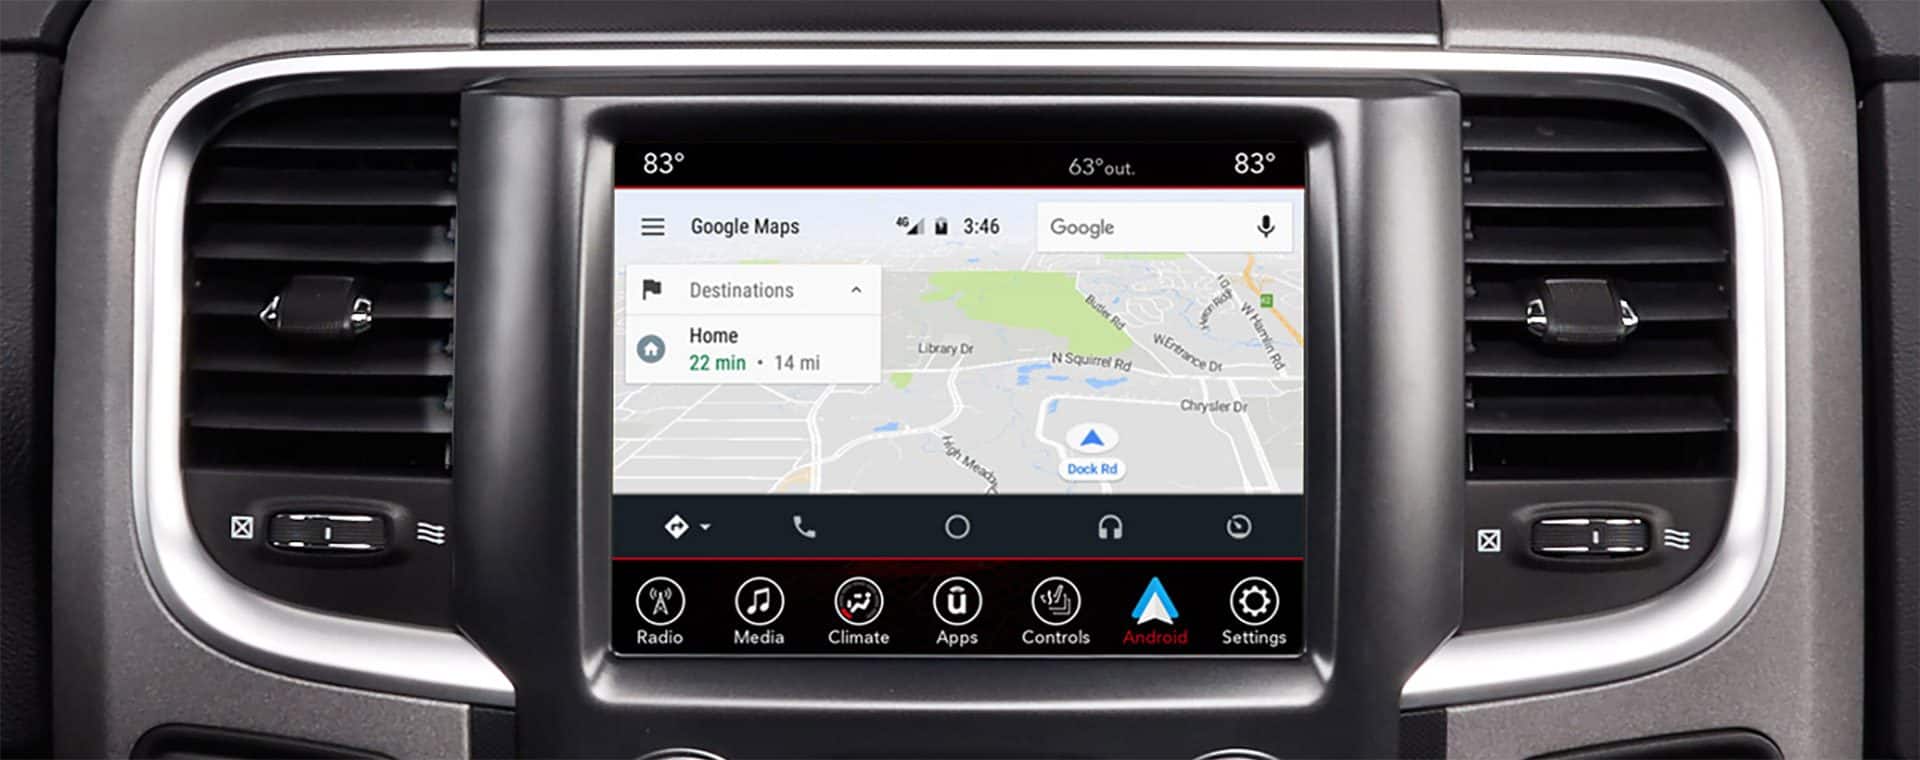 Uconnect - Ram Trucks Uconnect System Phone Features